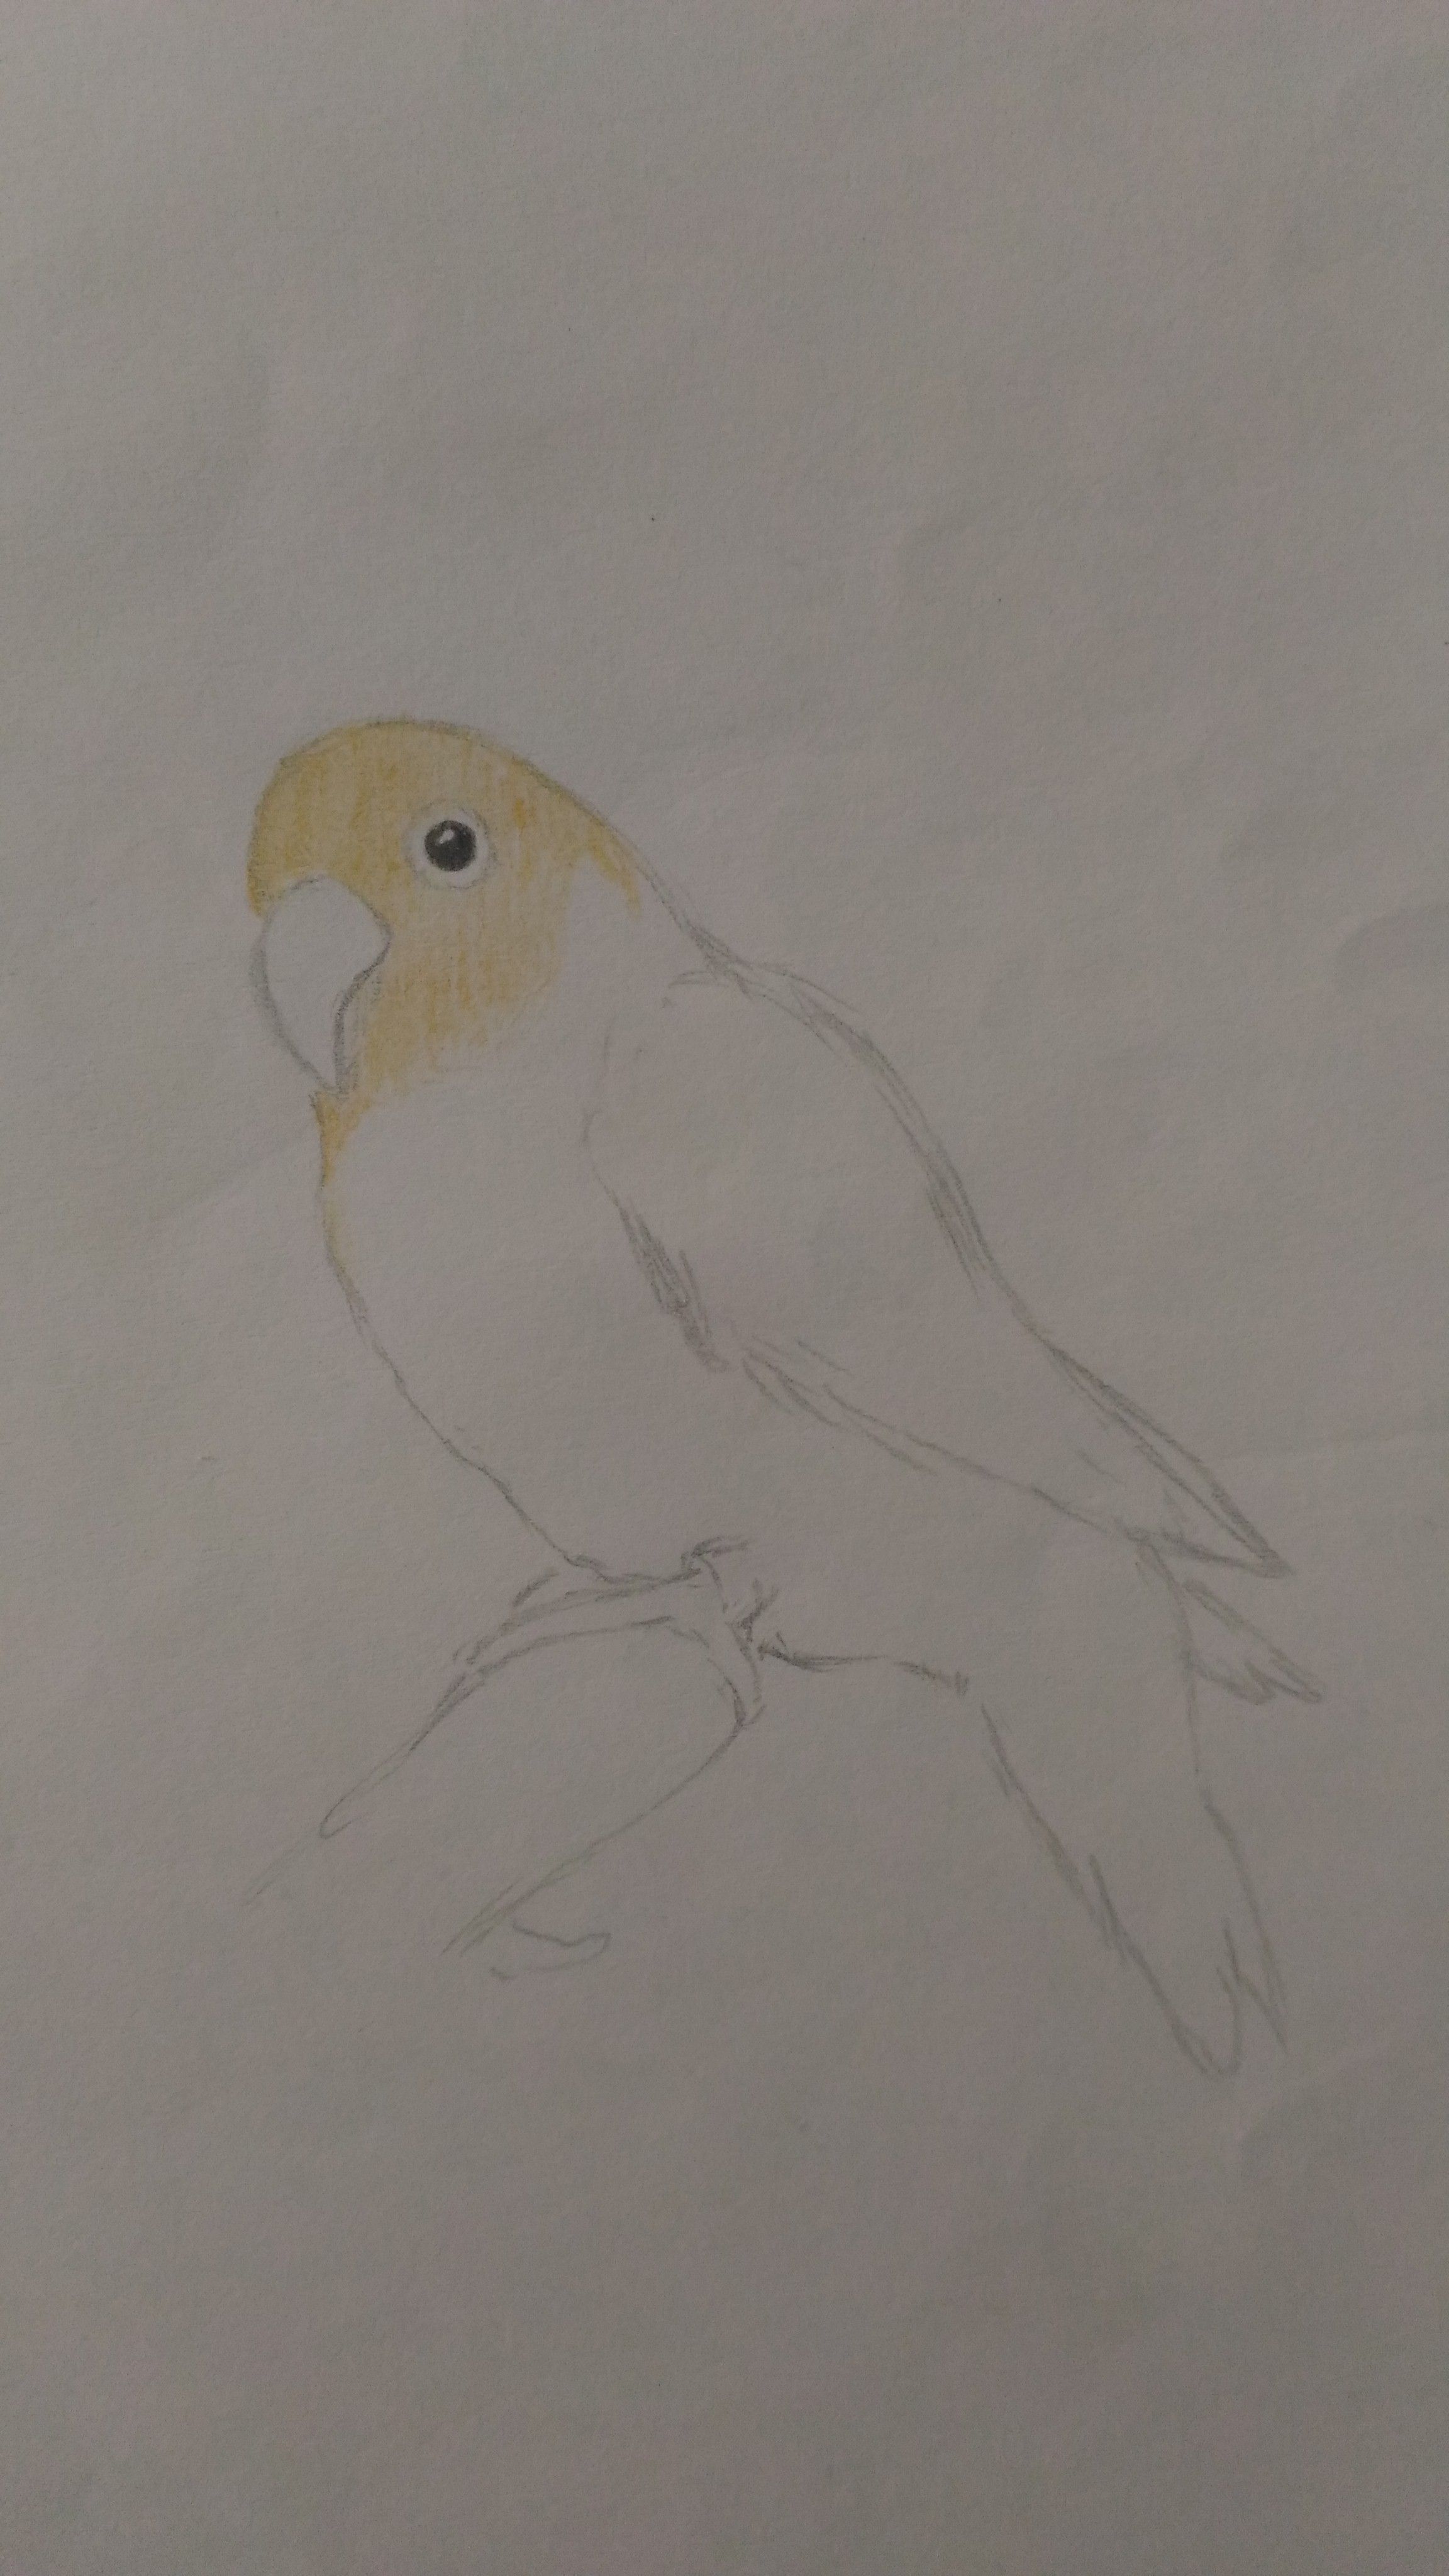 Drawing- Parrot #20106 Pencil drawing by Hongtao Huang | Artfinder